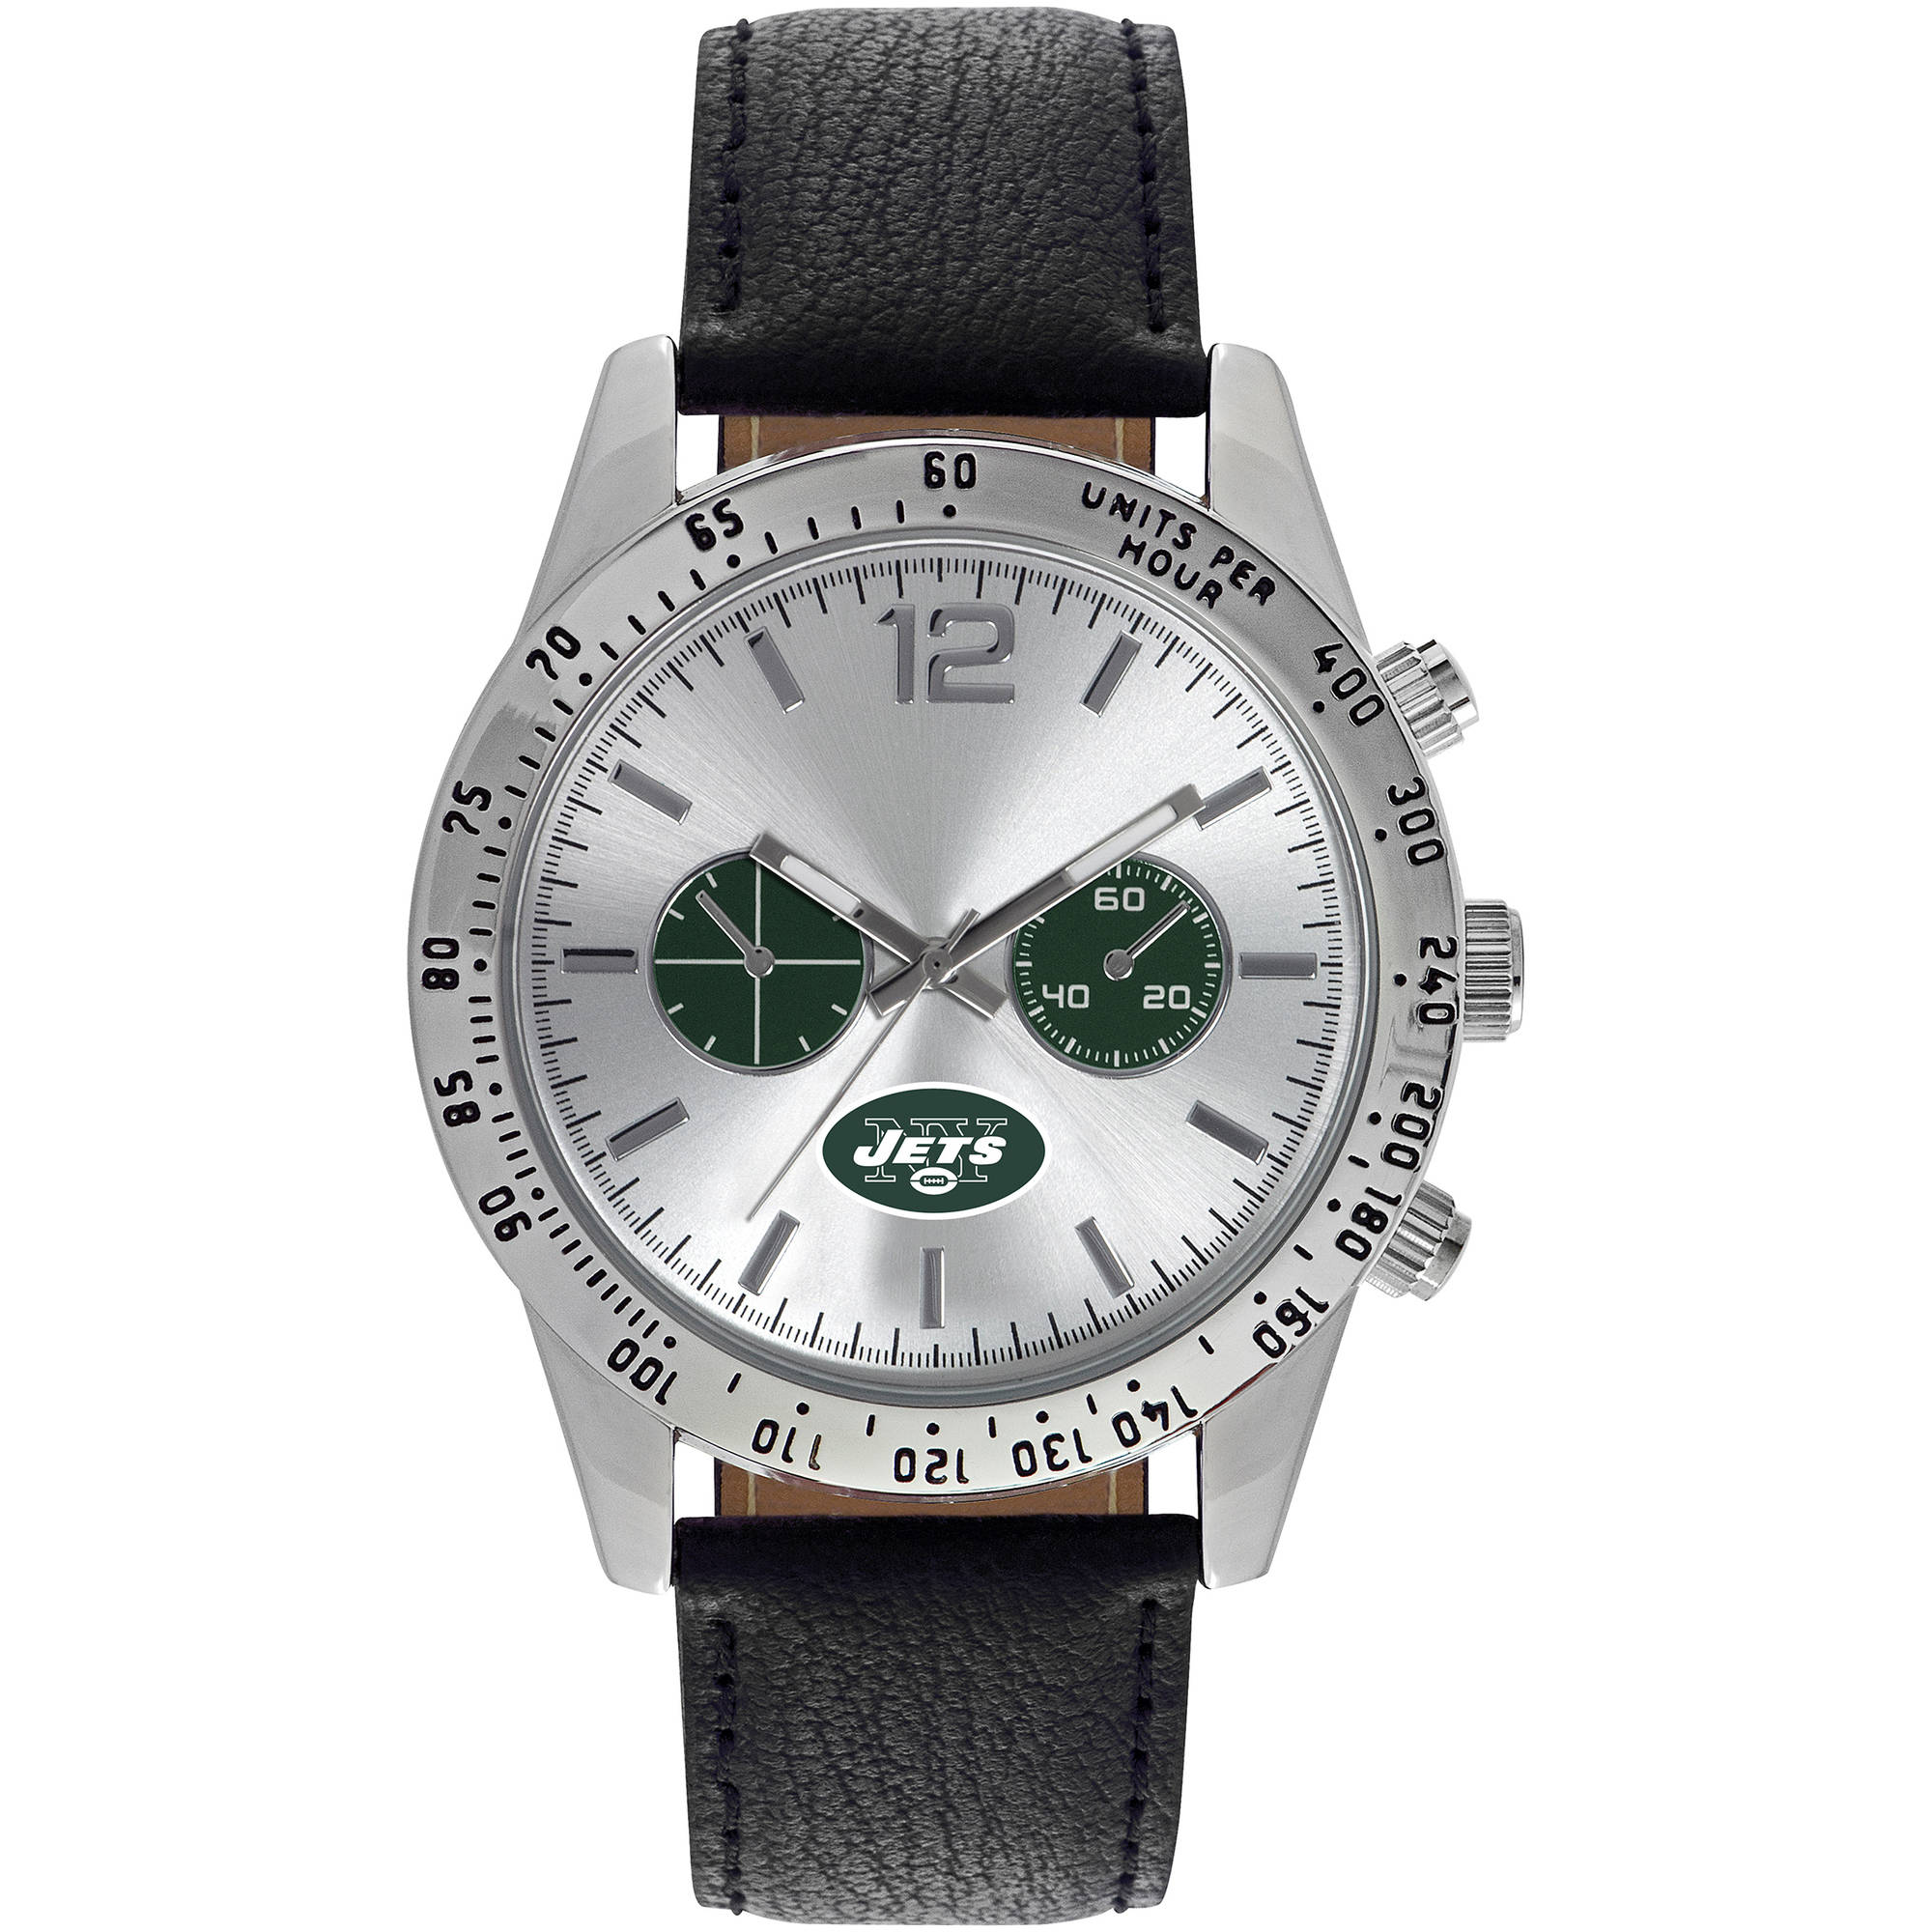 Game Time NFL Men's New York Jets Letterman Series Watch - image 1 of 2